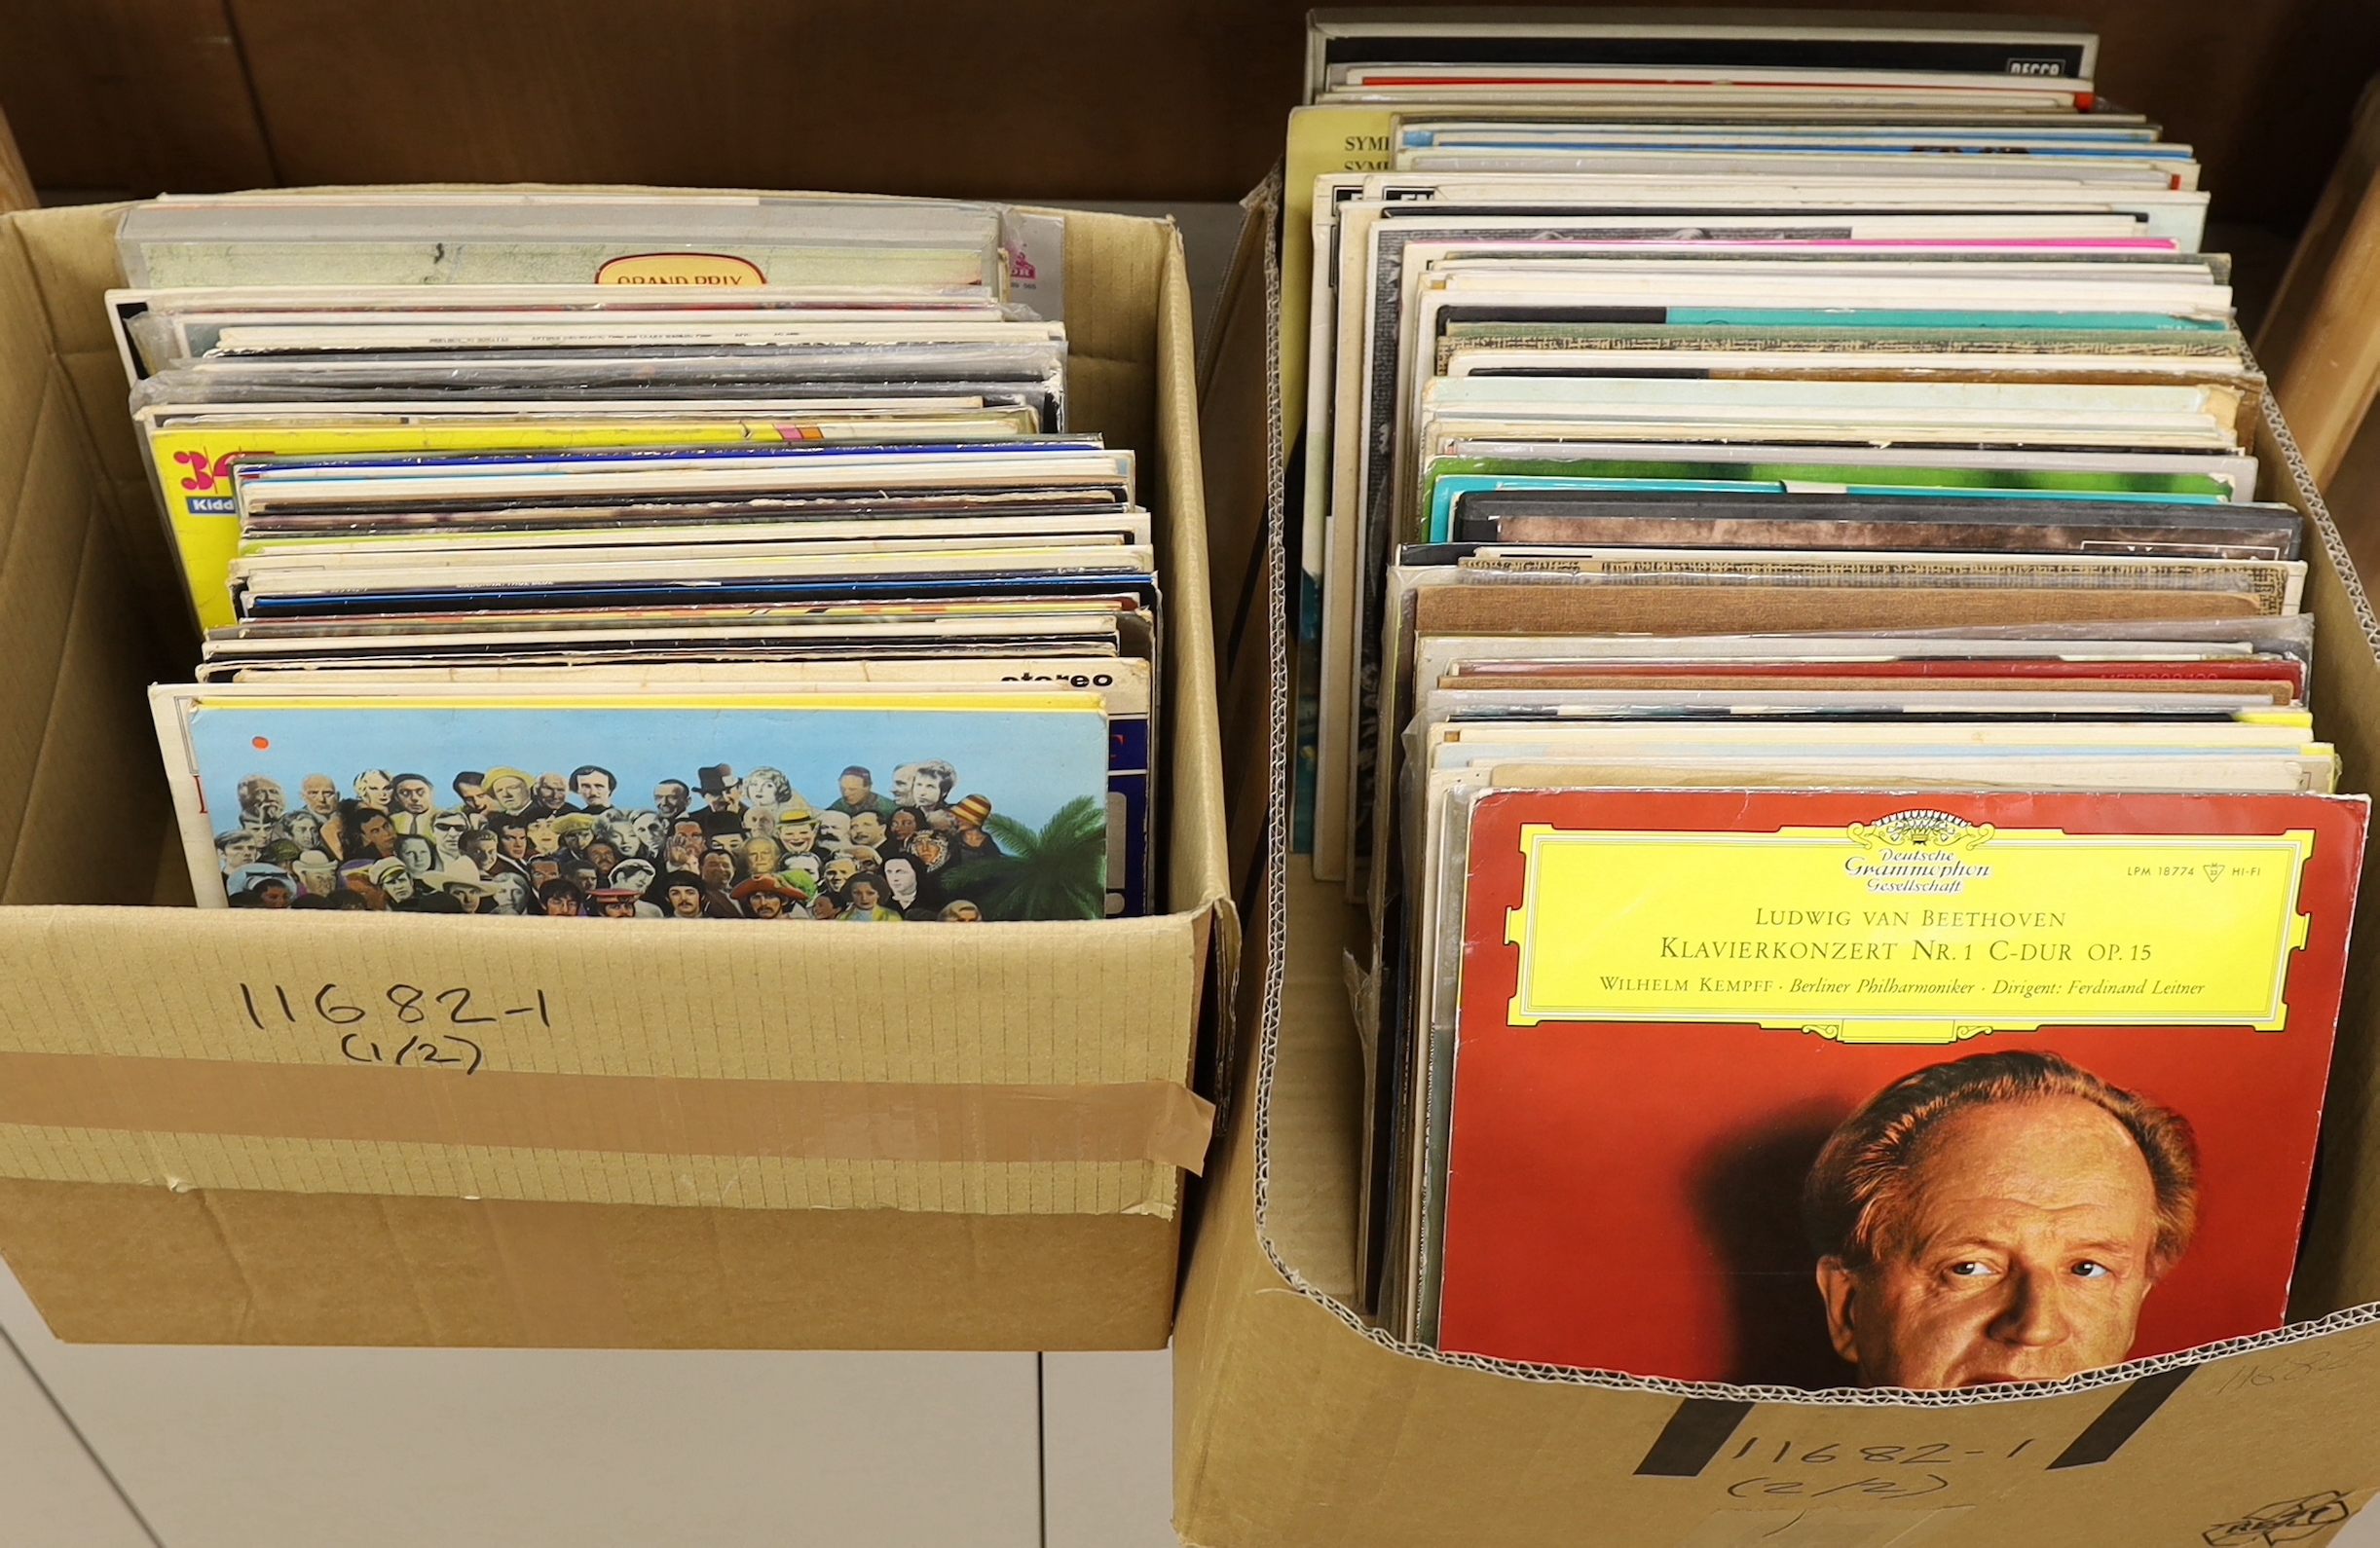 A collection of LPs including 1970's rock, classical recordings, box sets, etc, including; The Beatles, Queen, The Carpenters, Dionne Warwick, ABBA, Dave Brubeck, The Beach Boys, Haydn symphonies, Beethoven symphonies, o